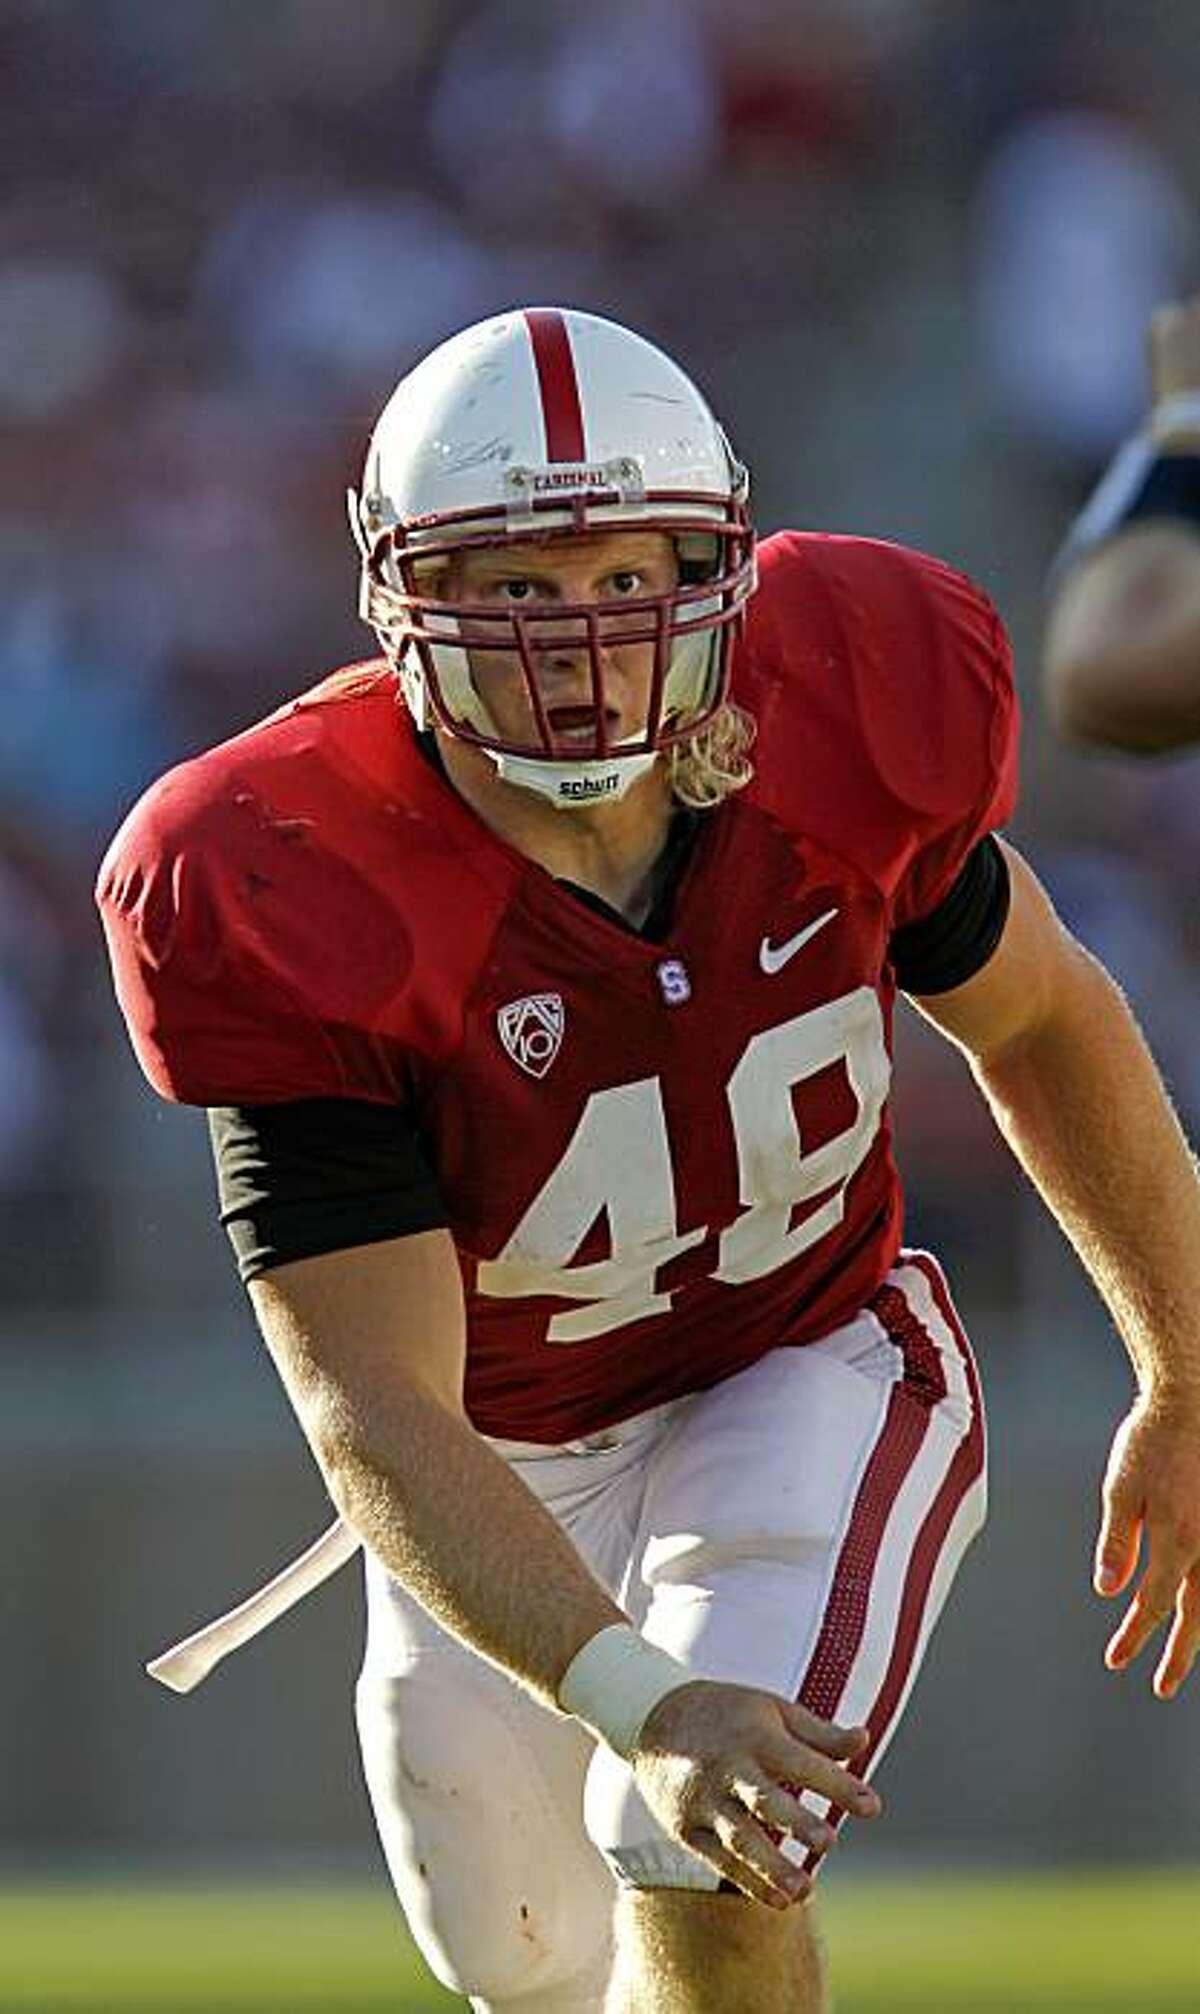 Stanford's Owen Marecic on defense in the third quarter against Sacramento State in Palo Alto on Saturday. Marecic also plays for the offense.